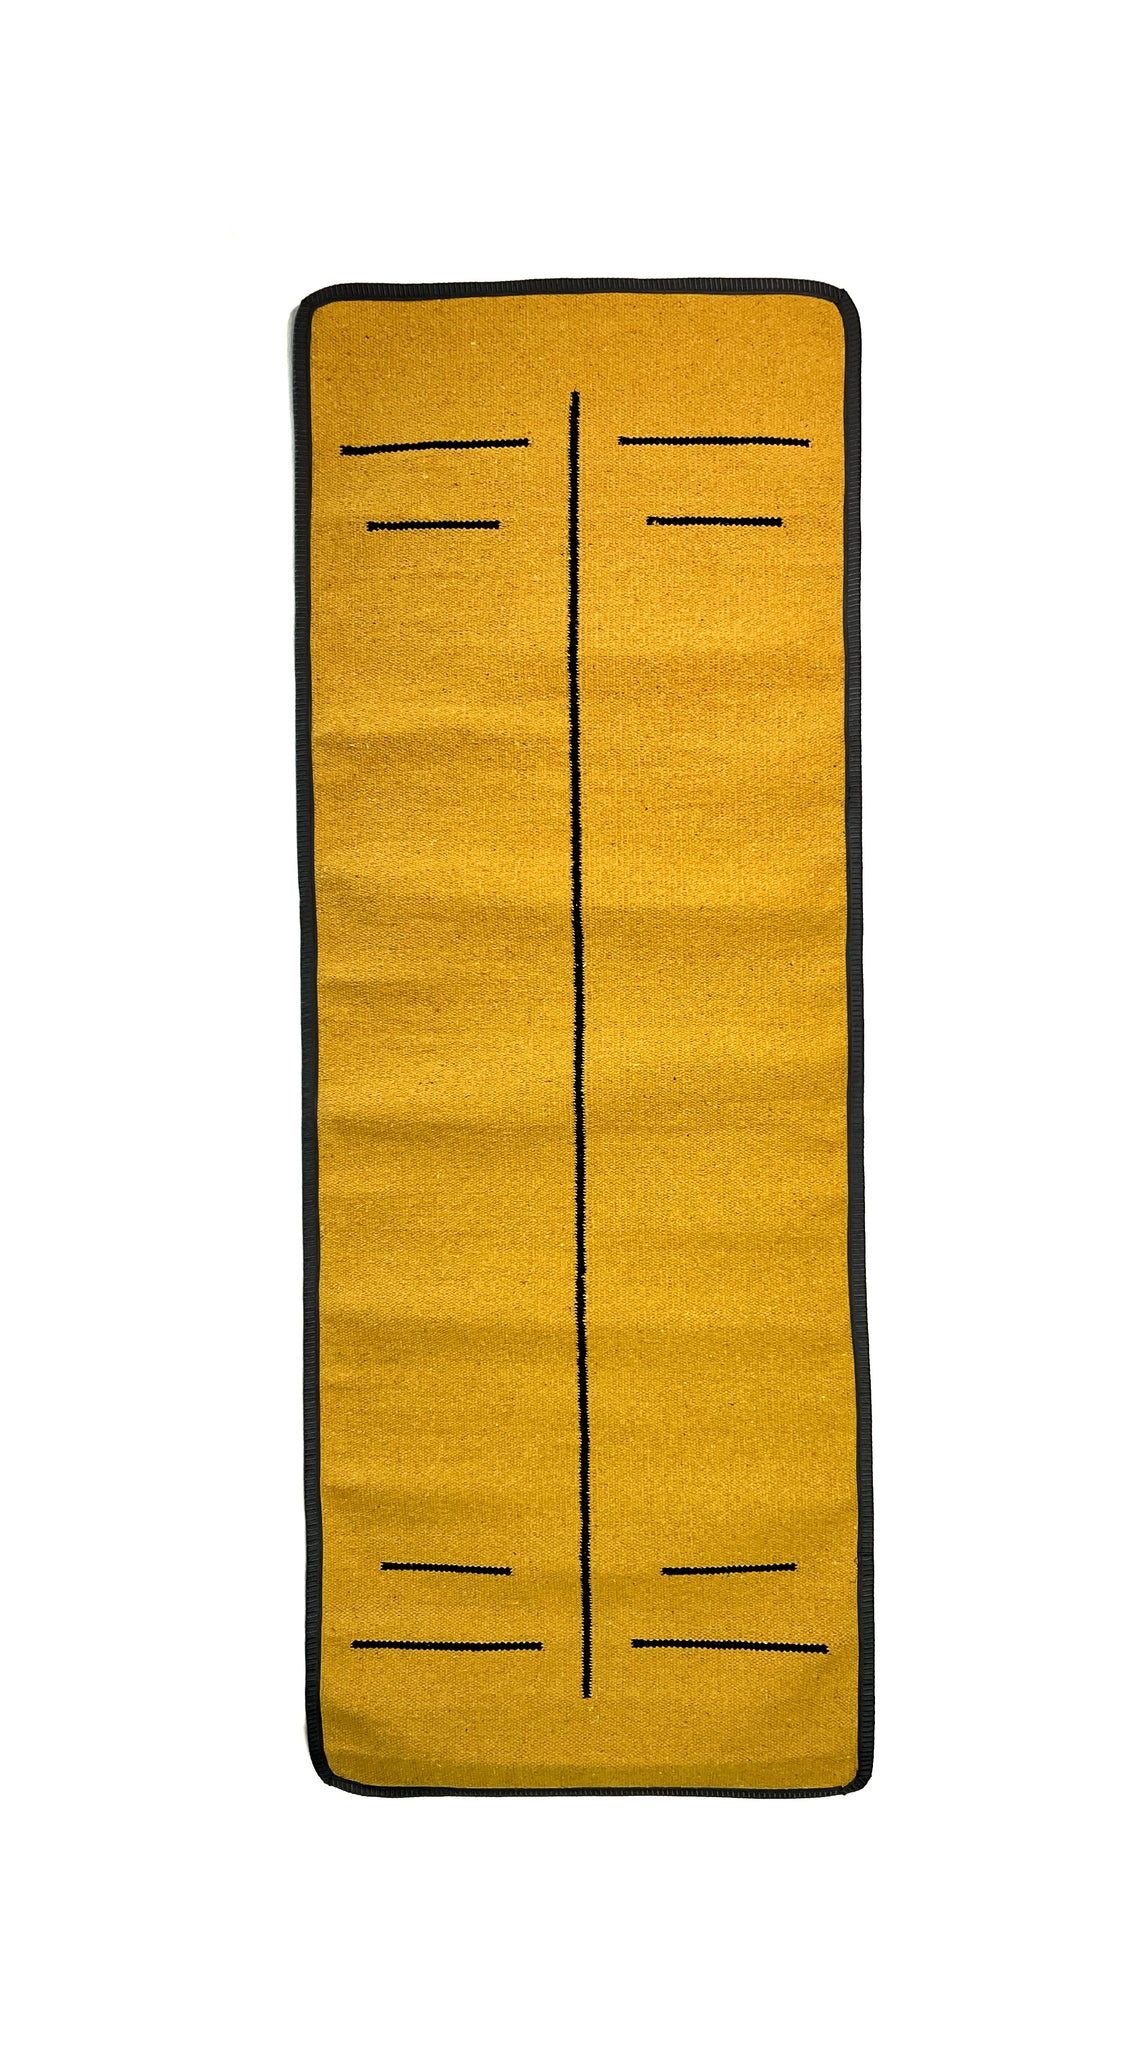 DVAAR COTTON  YOGA MAT TOPAZ YELLOW COLOUR WASHABLE NATURAL MAT 5MM LINES FOR ALIGNMENT HOME YOGA  WORKOUTS SUSTAINABLE MATS GEMSTONE COLLECTION.